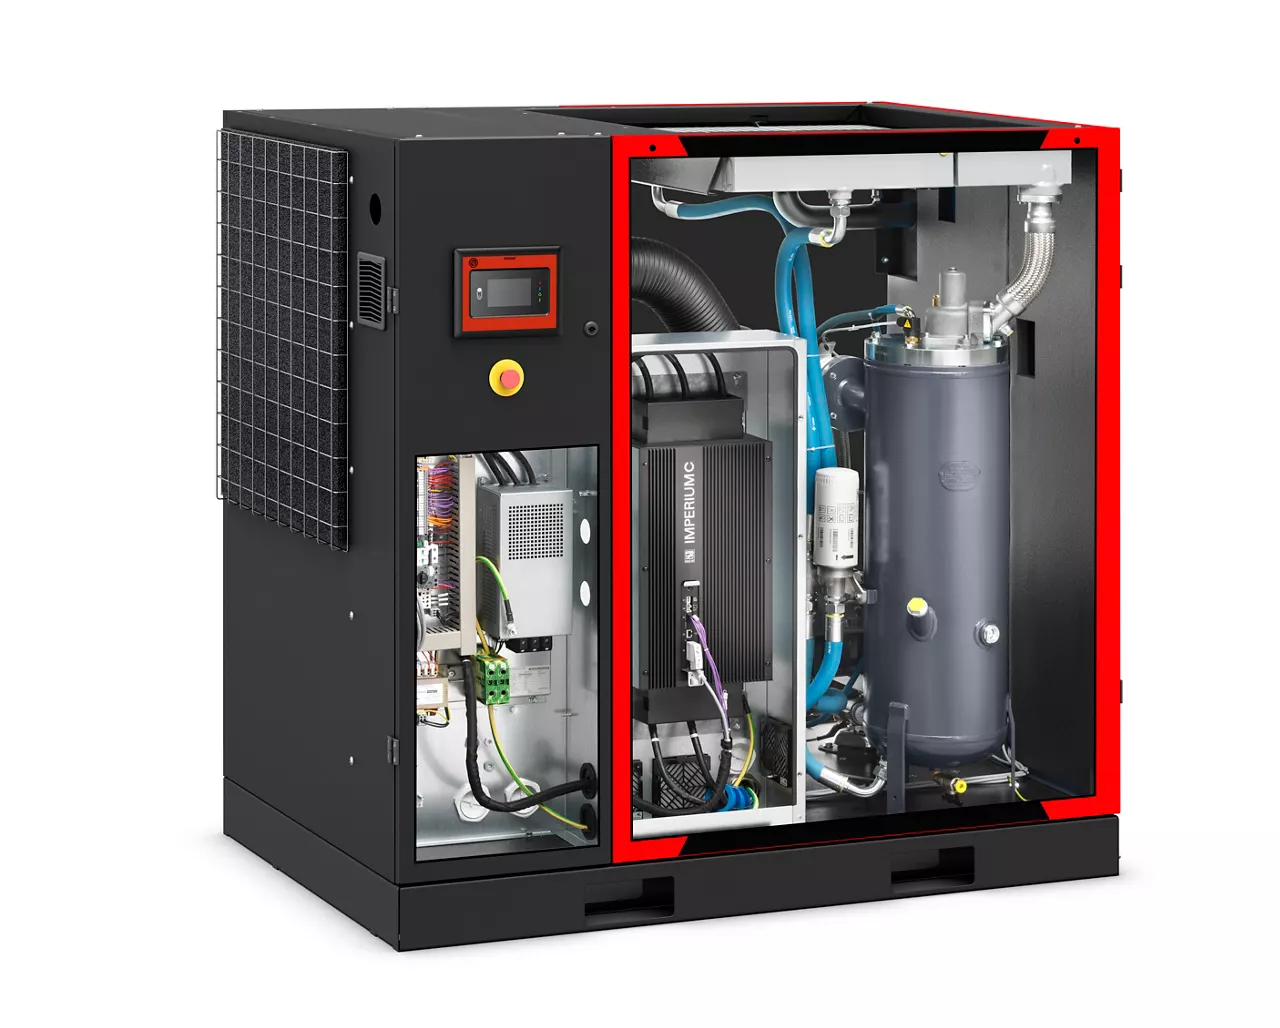 PERMANENT MAGNET MOTOR VARIABLE SPEED DRIVEN SCREW COMPRESSORS